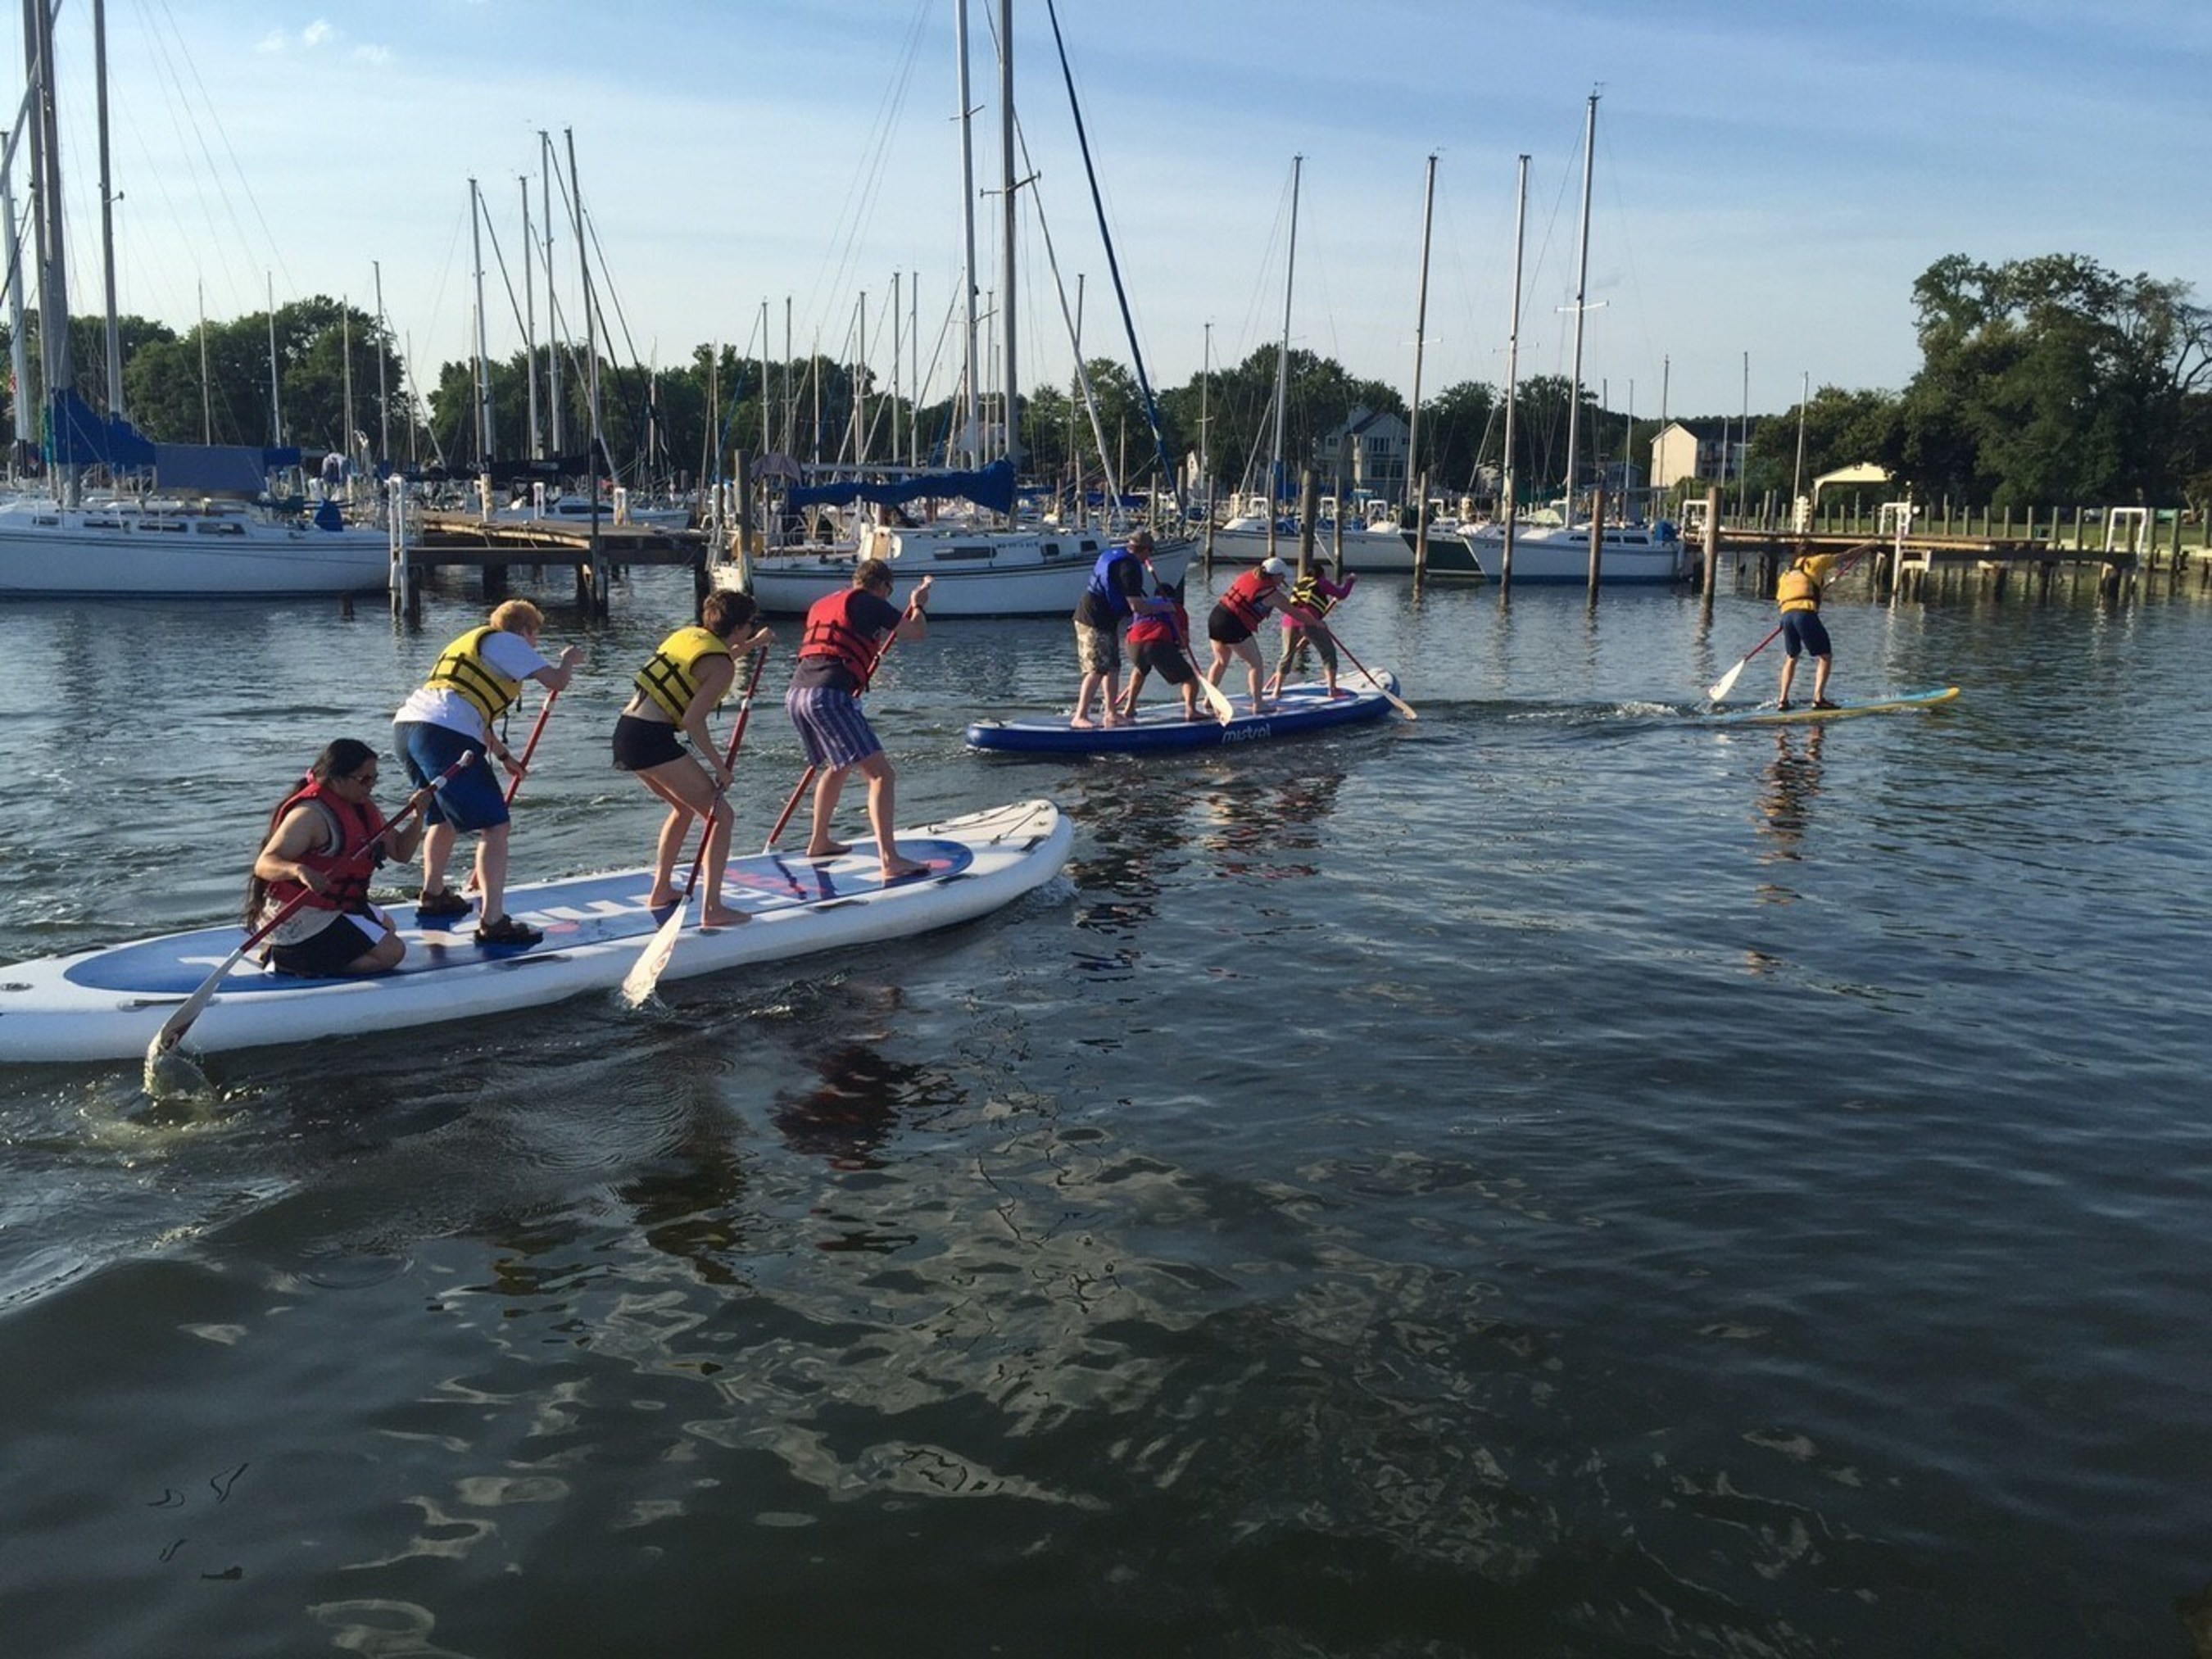 Wounded veterans recently competed as teams during a monster stand-up paddleboarding program gathering with Wounded Warrior Project in Middle River, Maryland.